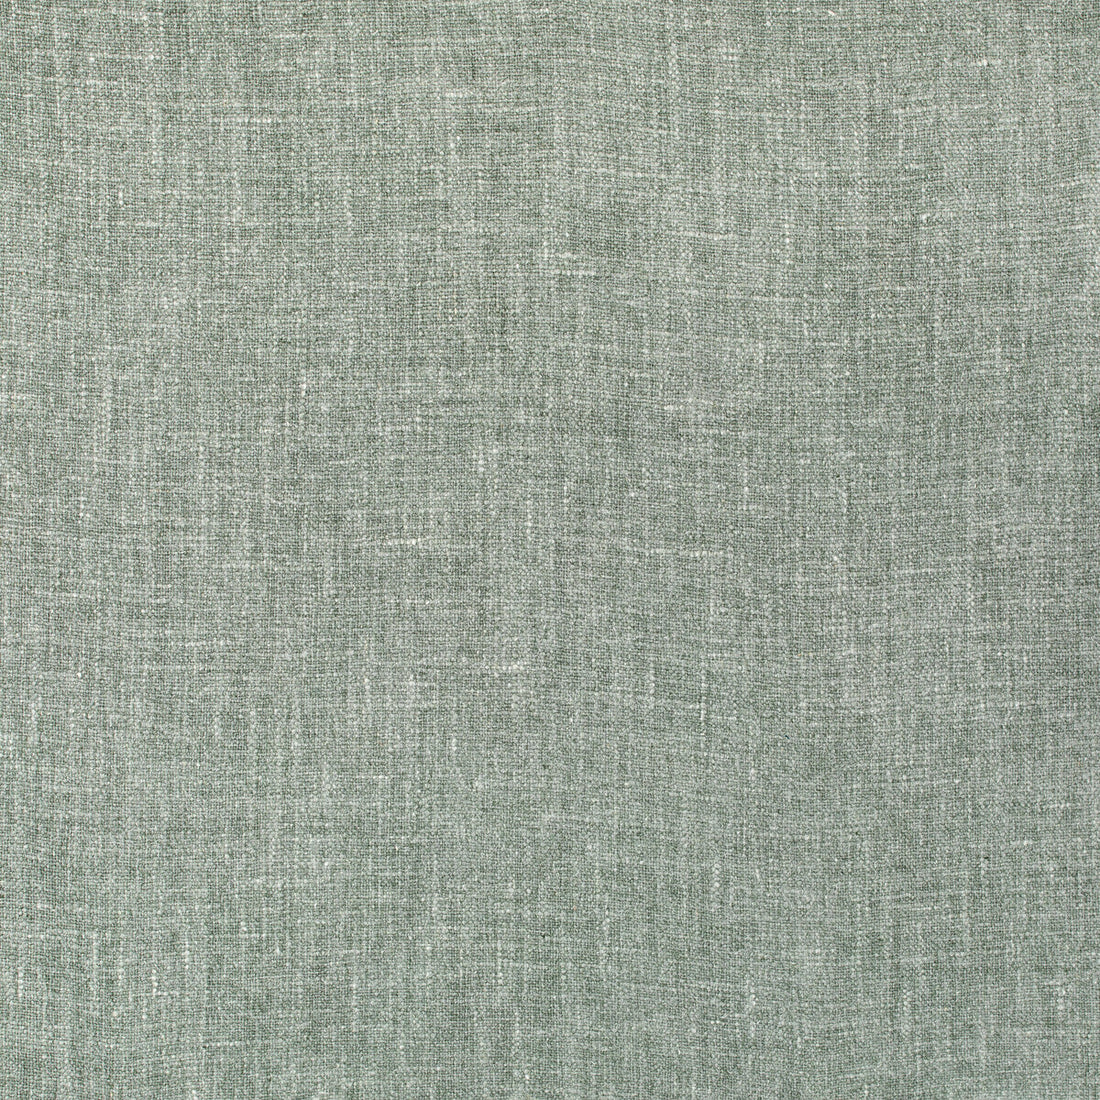 Tumbly fabric in jade color - pattern 36918.13.0 - by Kravet Couture in the The Naturals collection